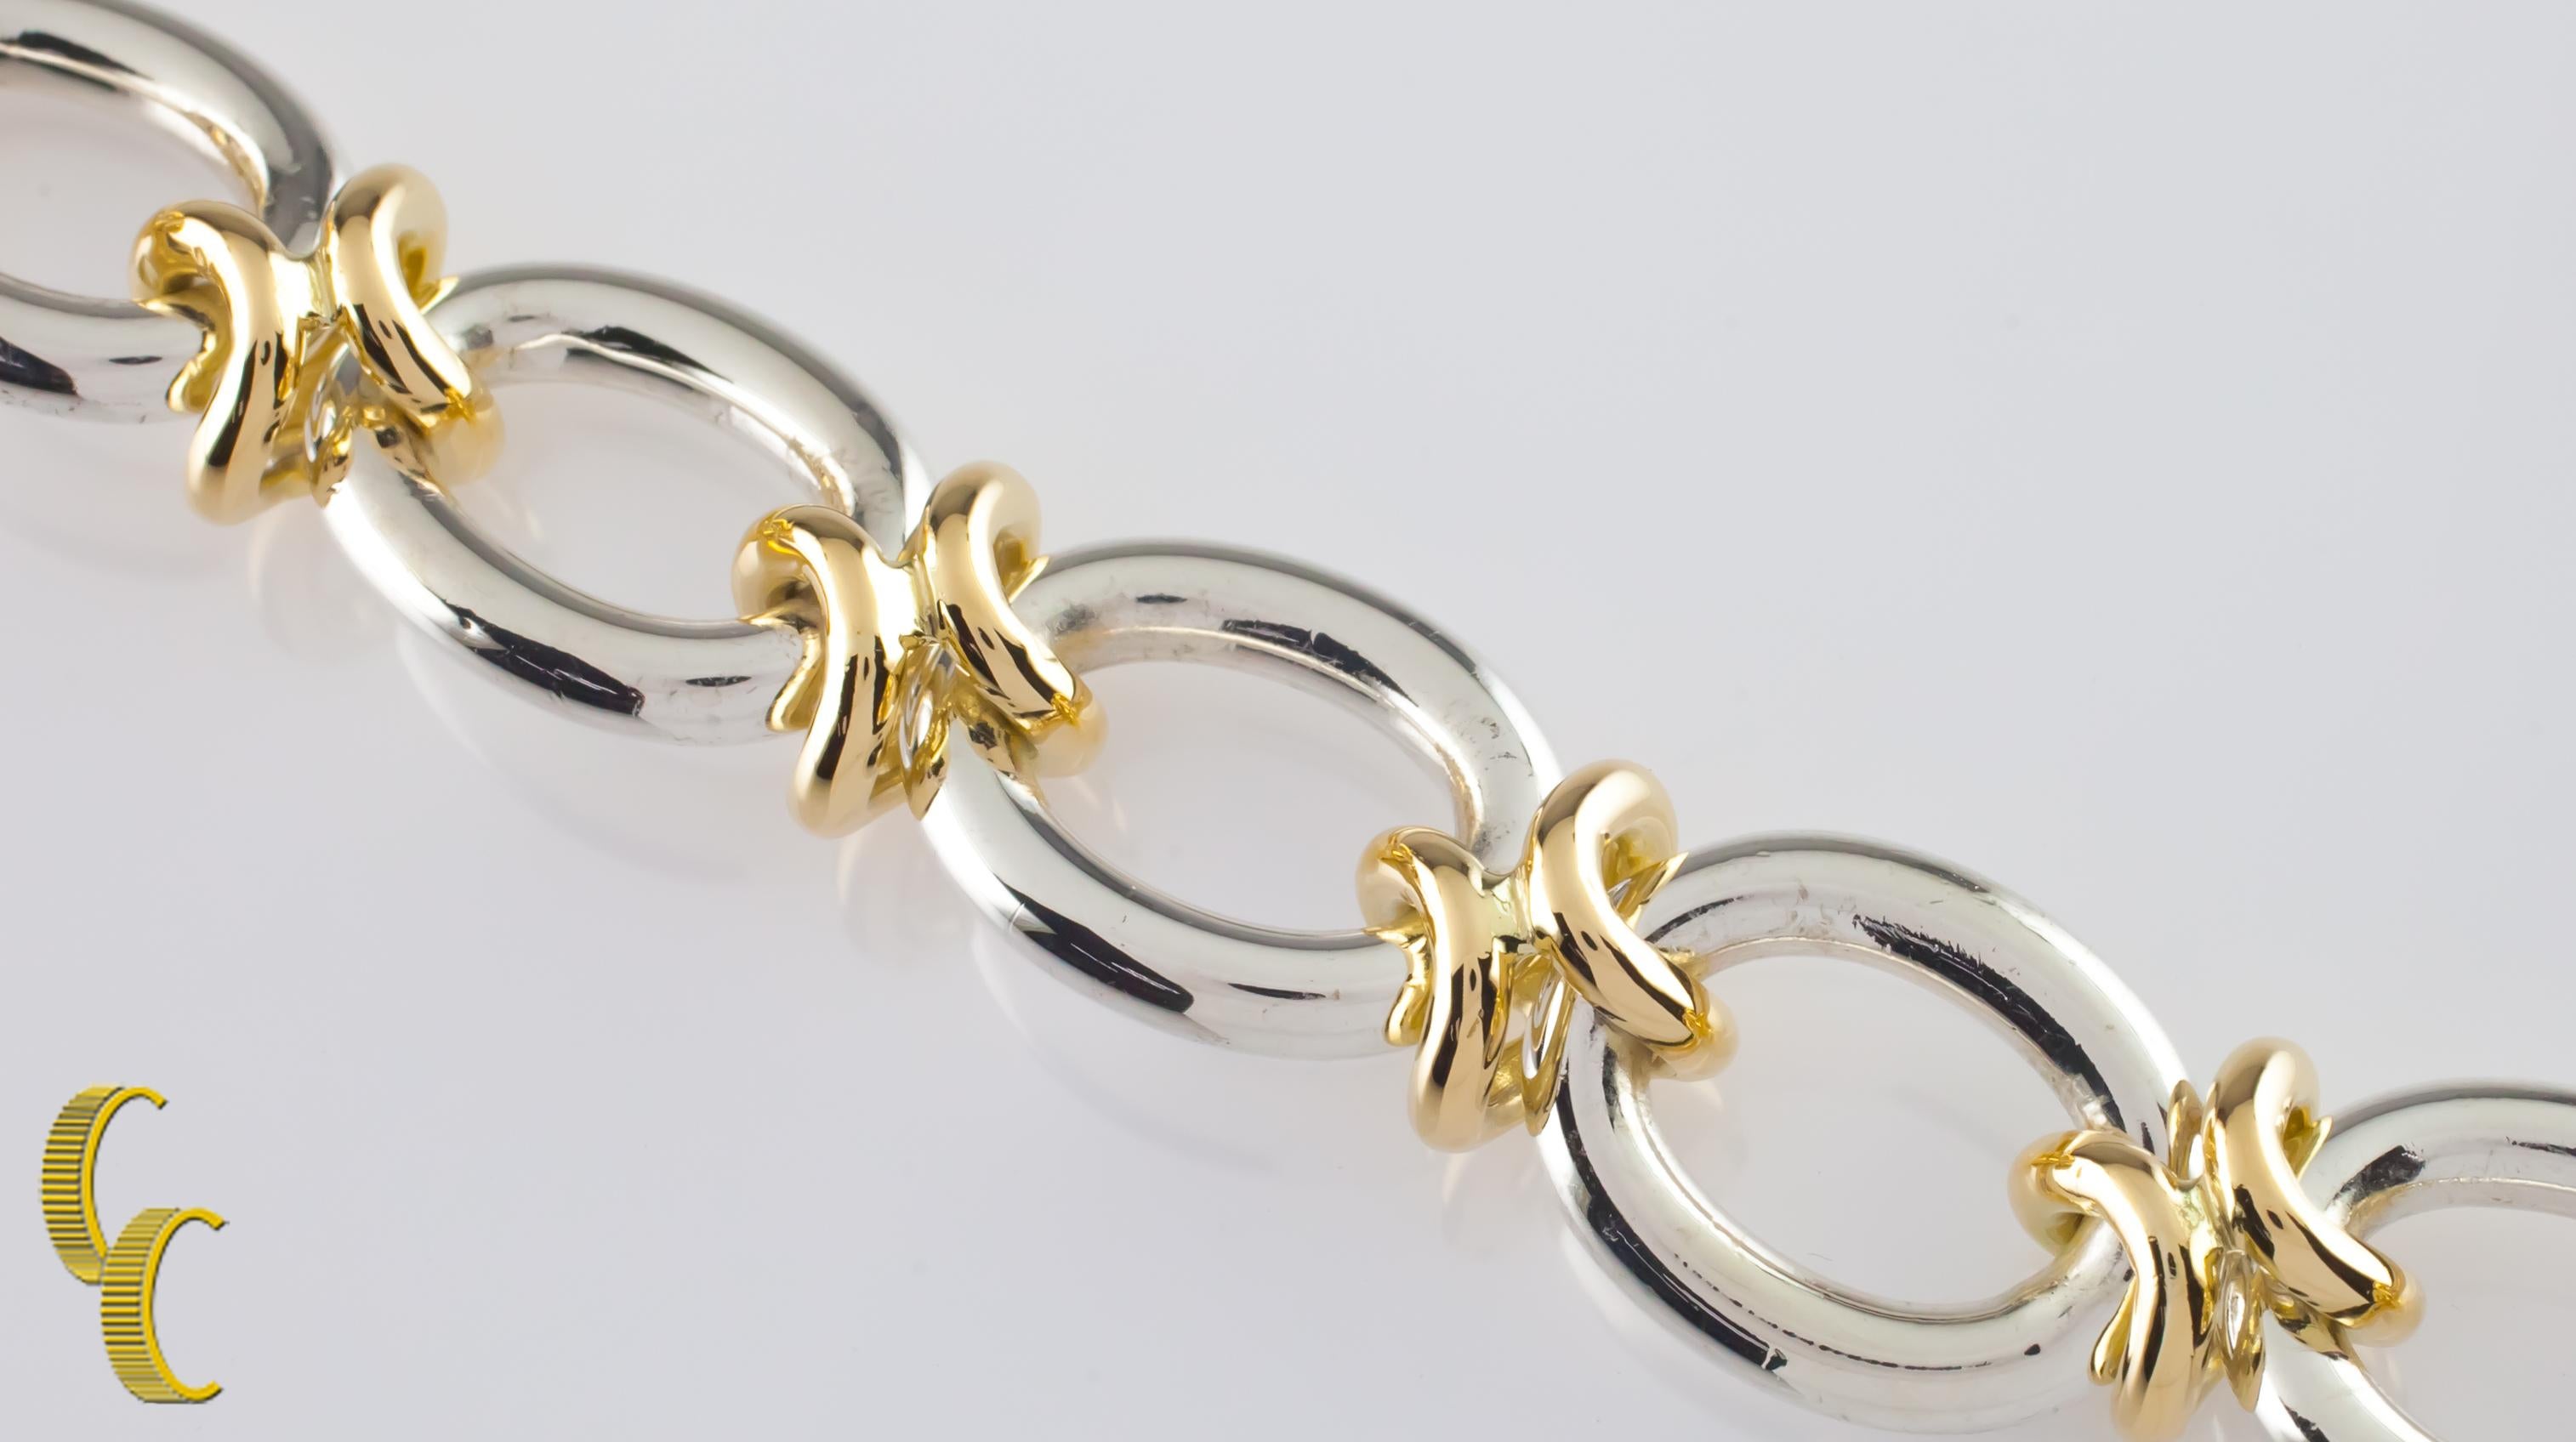 Gorgeous Sterling Silver and 14k Yellow Gold Link Bracelet
Features Large Oval Sterling Silver Links connected by 14k Yellow Gold H-Shaped Links
Silver Links are Approximately 20 mm Long x 16 mm Wide
Made in Italy
Total Length = 7.5